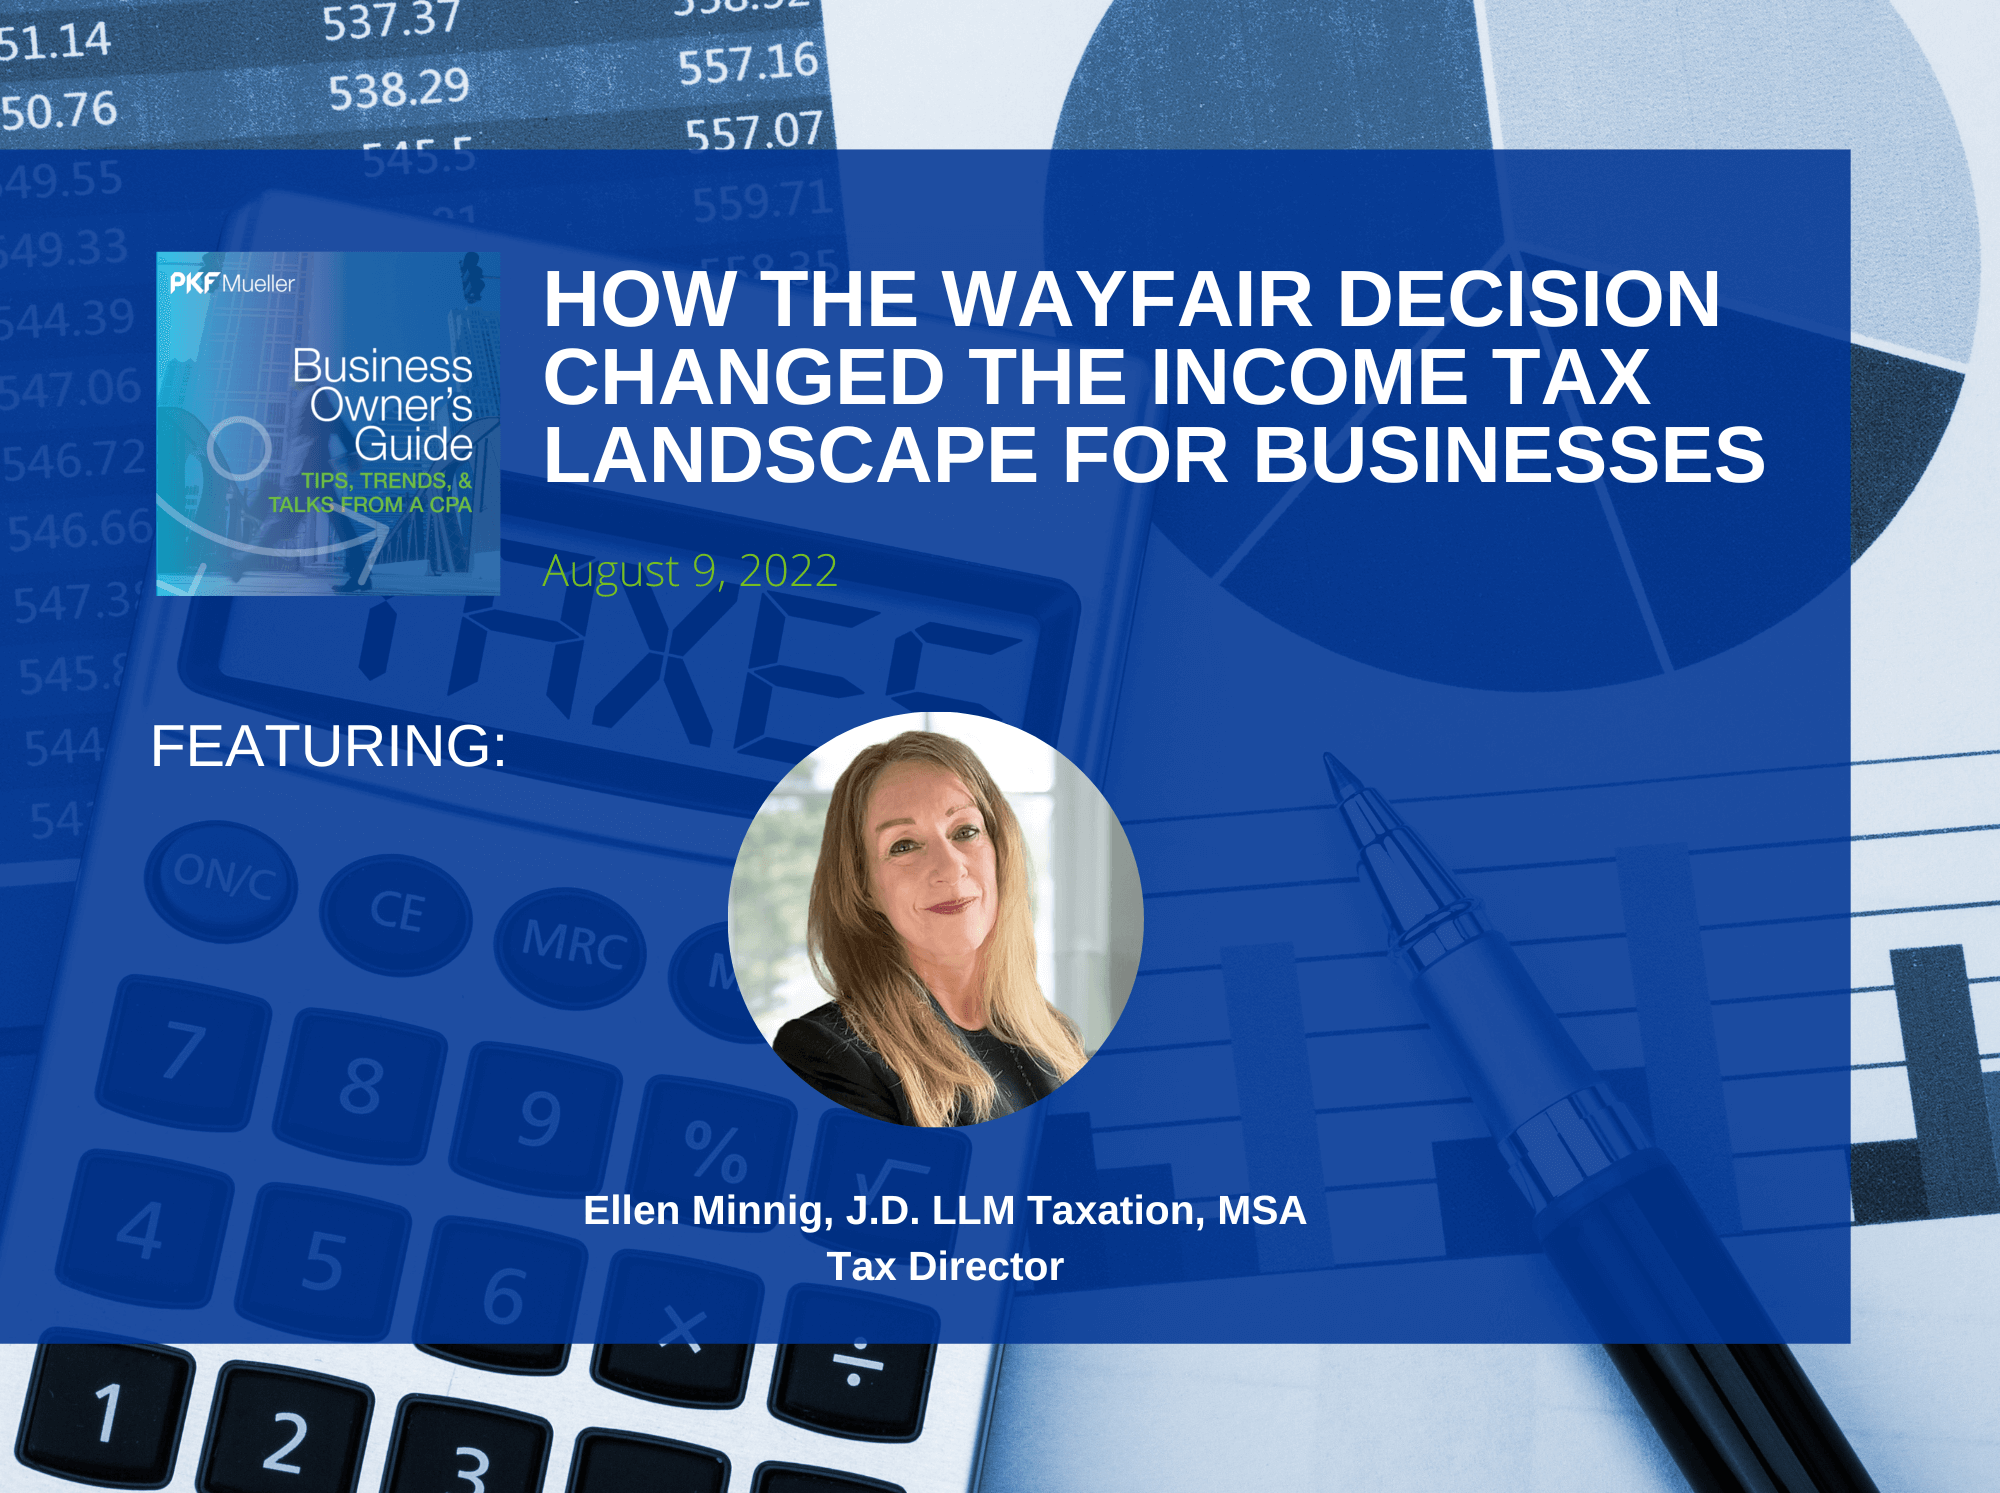 How the Wayfair Decision Changed the Income Tax Landscape for Businesses